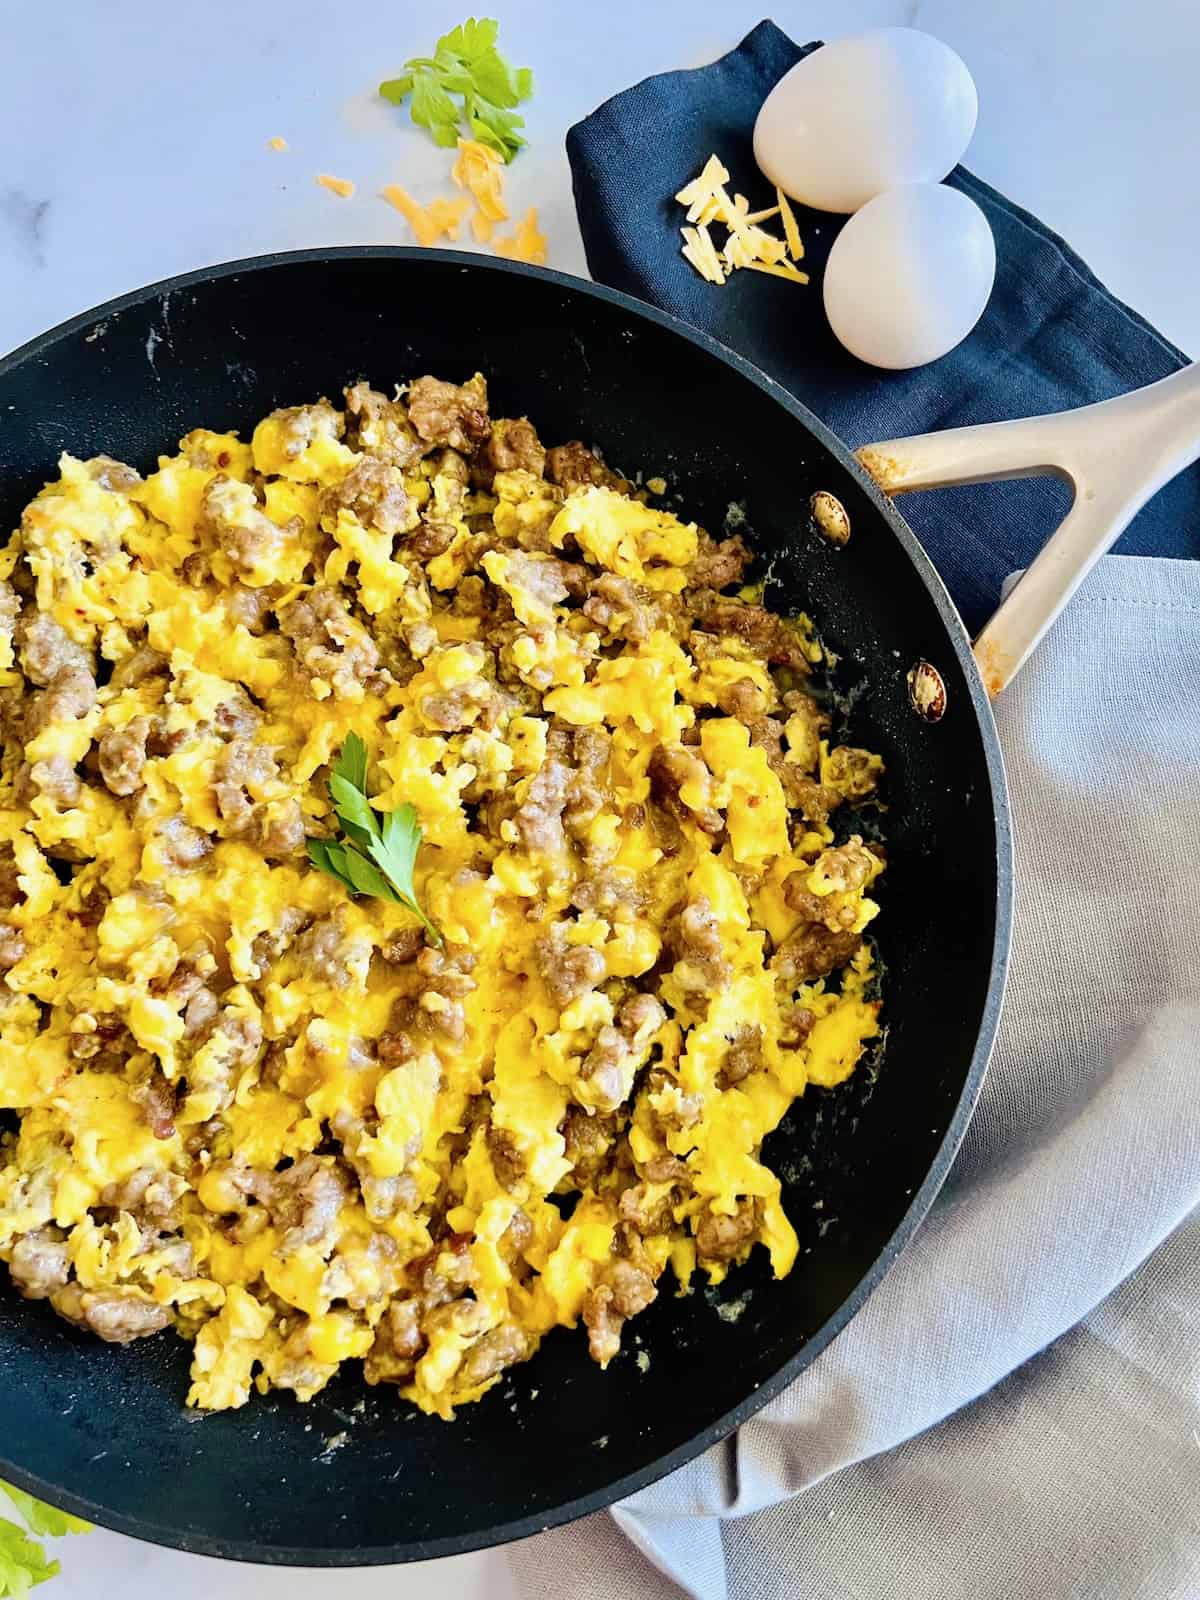 Breakfast Sausage, Egg, & Cheese Scramble in a skillet topped with parsley leaves next to eggs in the shell and shredded cheese.